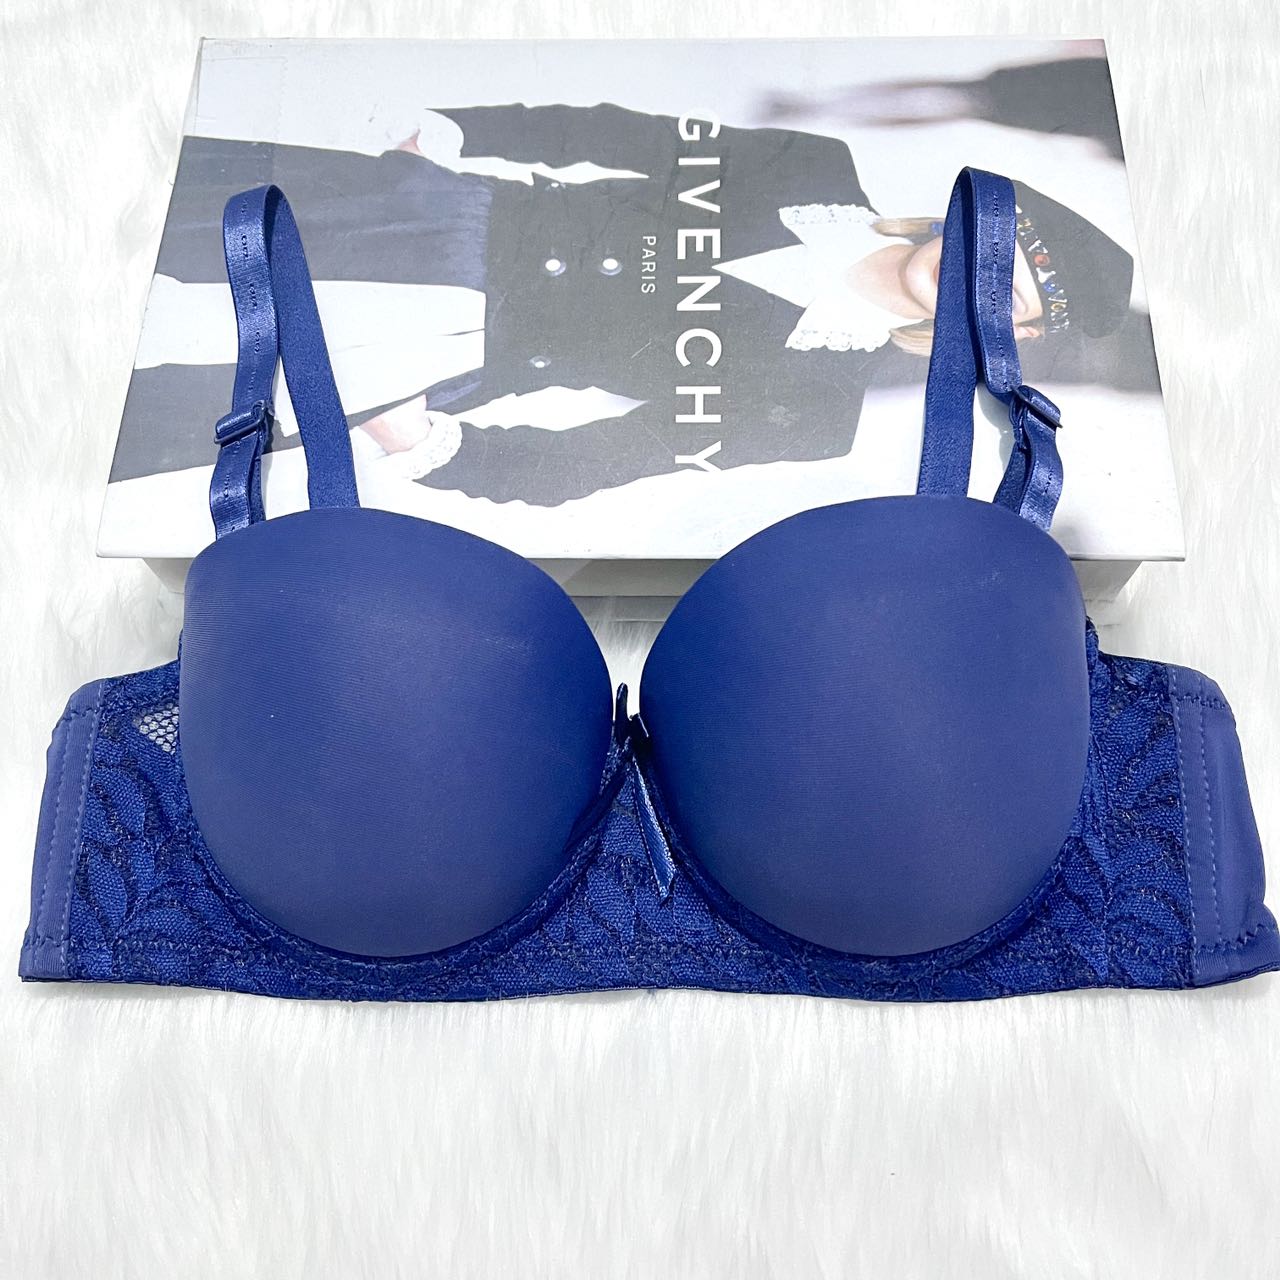 8005 New design Bra w/ wire a little push up w/ lace design Cup A only